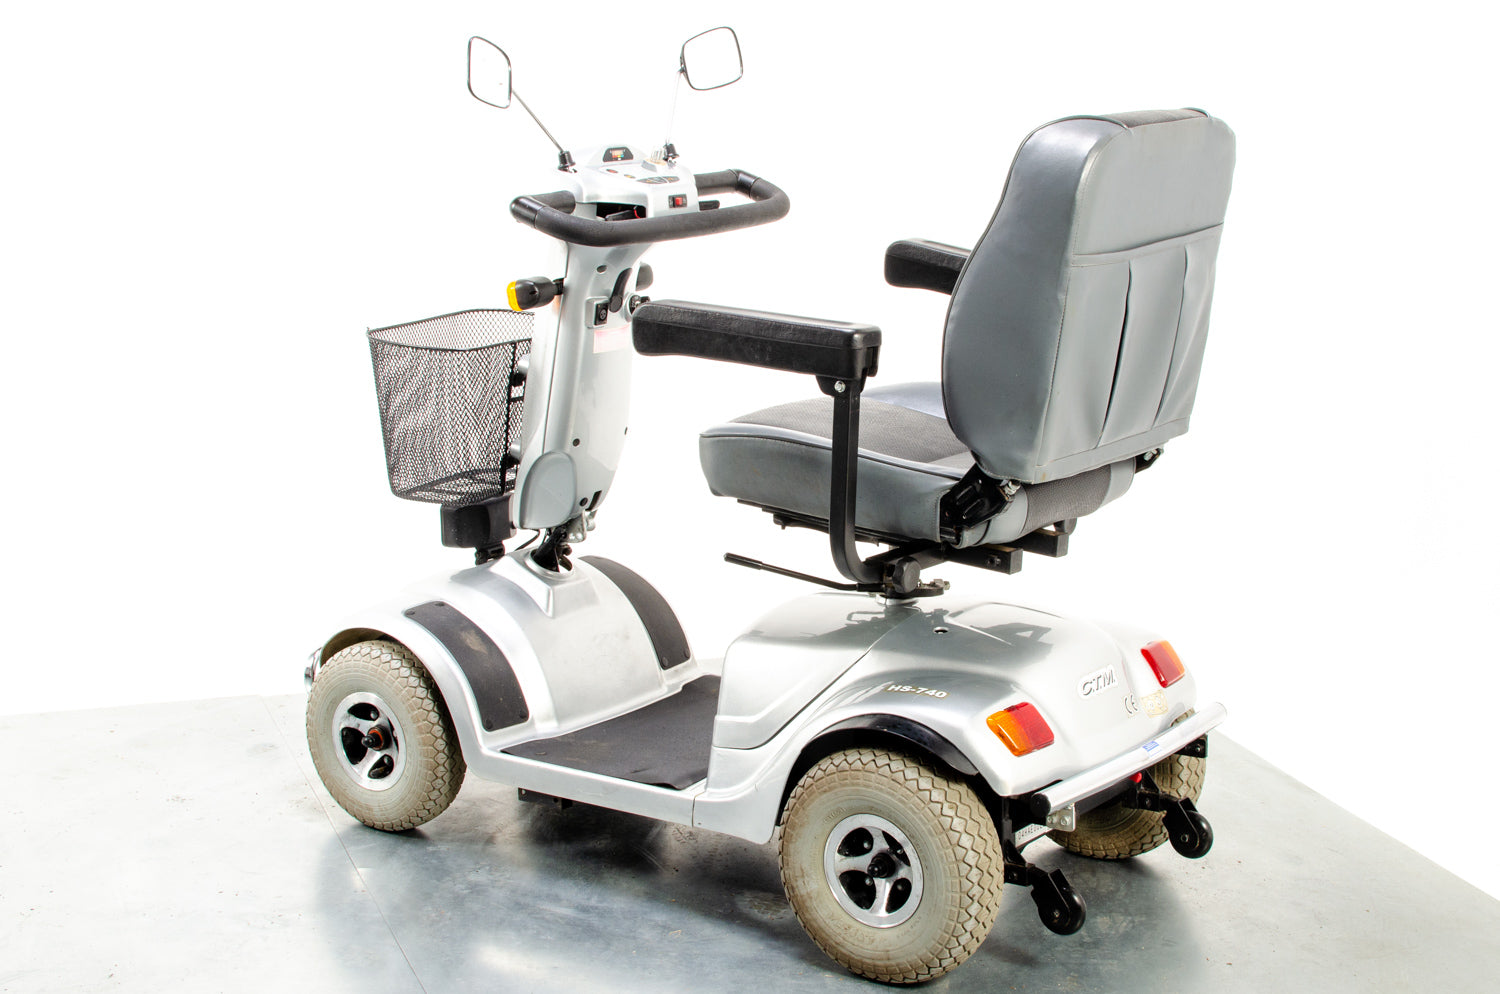 CTM HS-740 Used Mobility Scooter Midsize Pavement Comfy Bariatric Pneumatic Tyres Silver